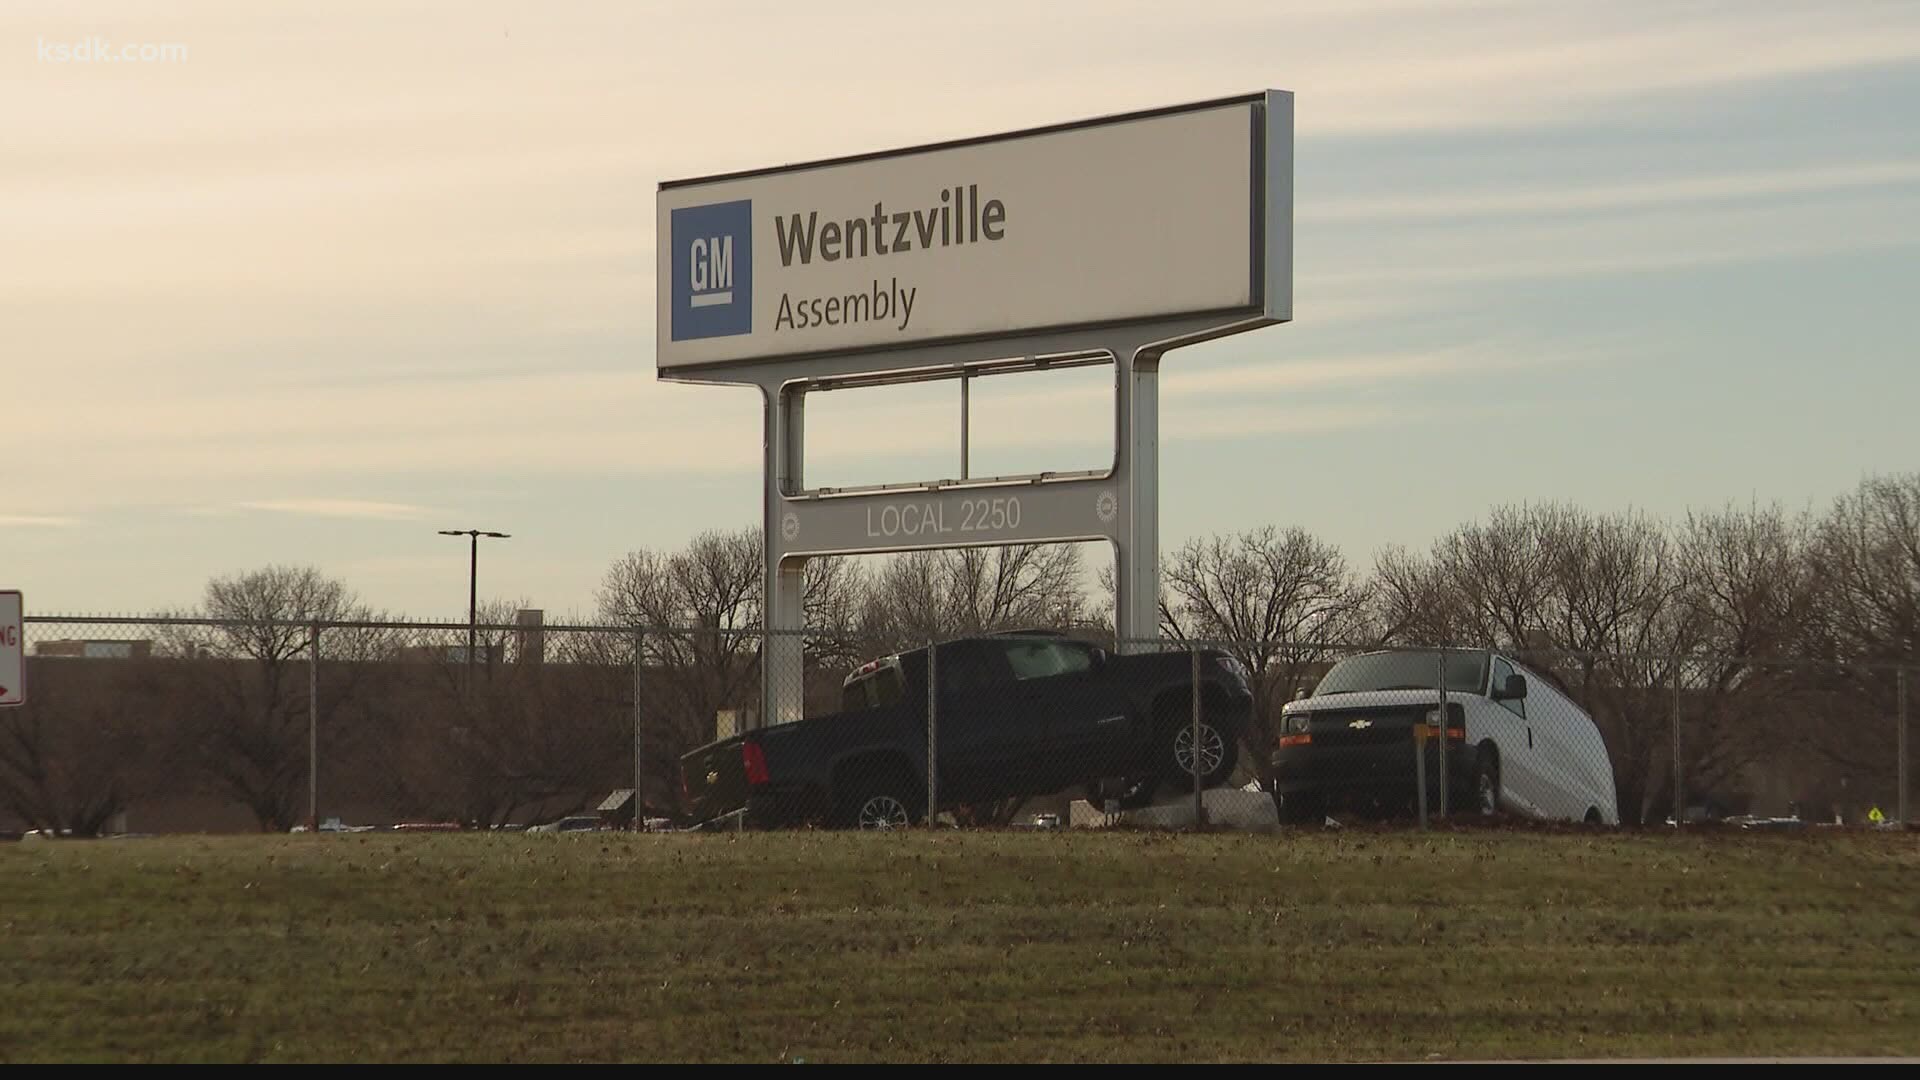 General Motors is hiring for temporary positions at its Wentzville plant.